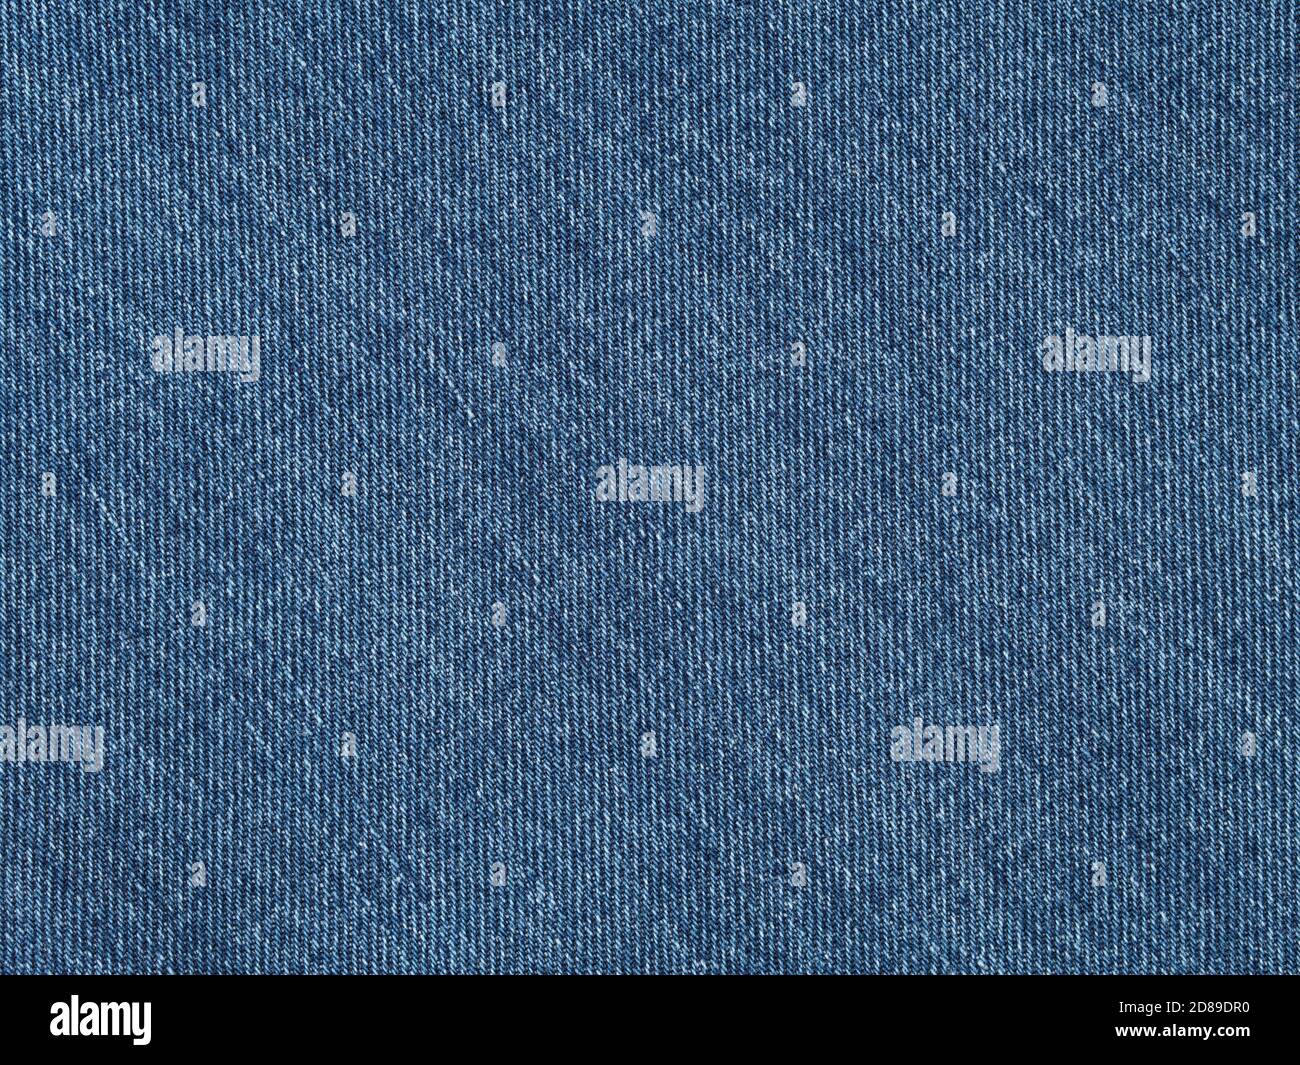 Blue jeans fabric surface texture, denim cloth background Stock Photo -  Alamy